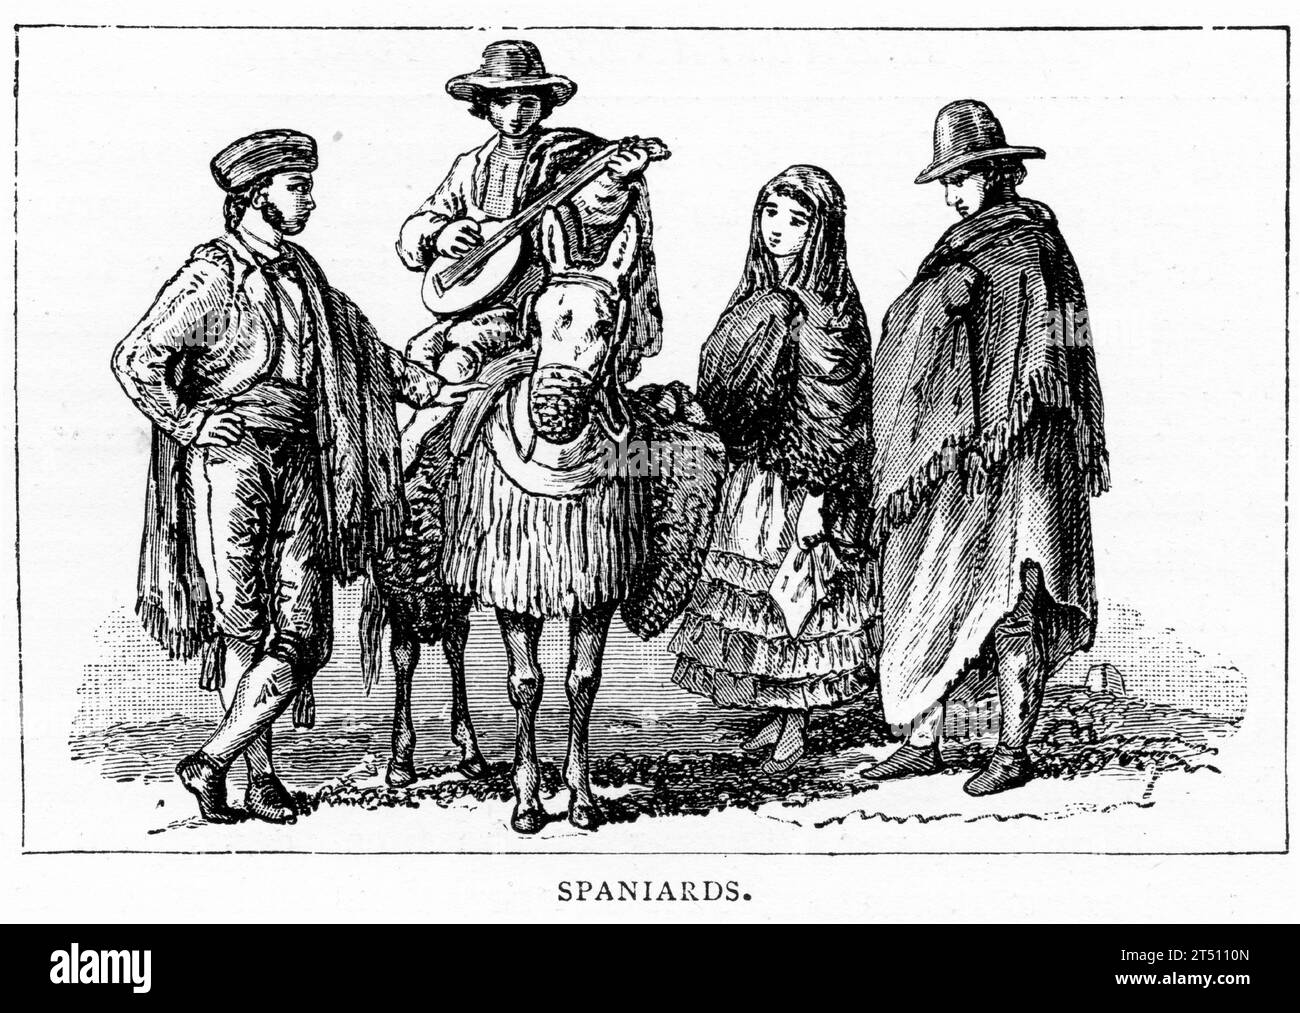 Engraving of a group of Spanish peasants Stock Photo